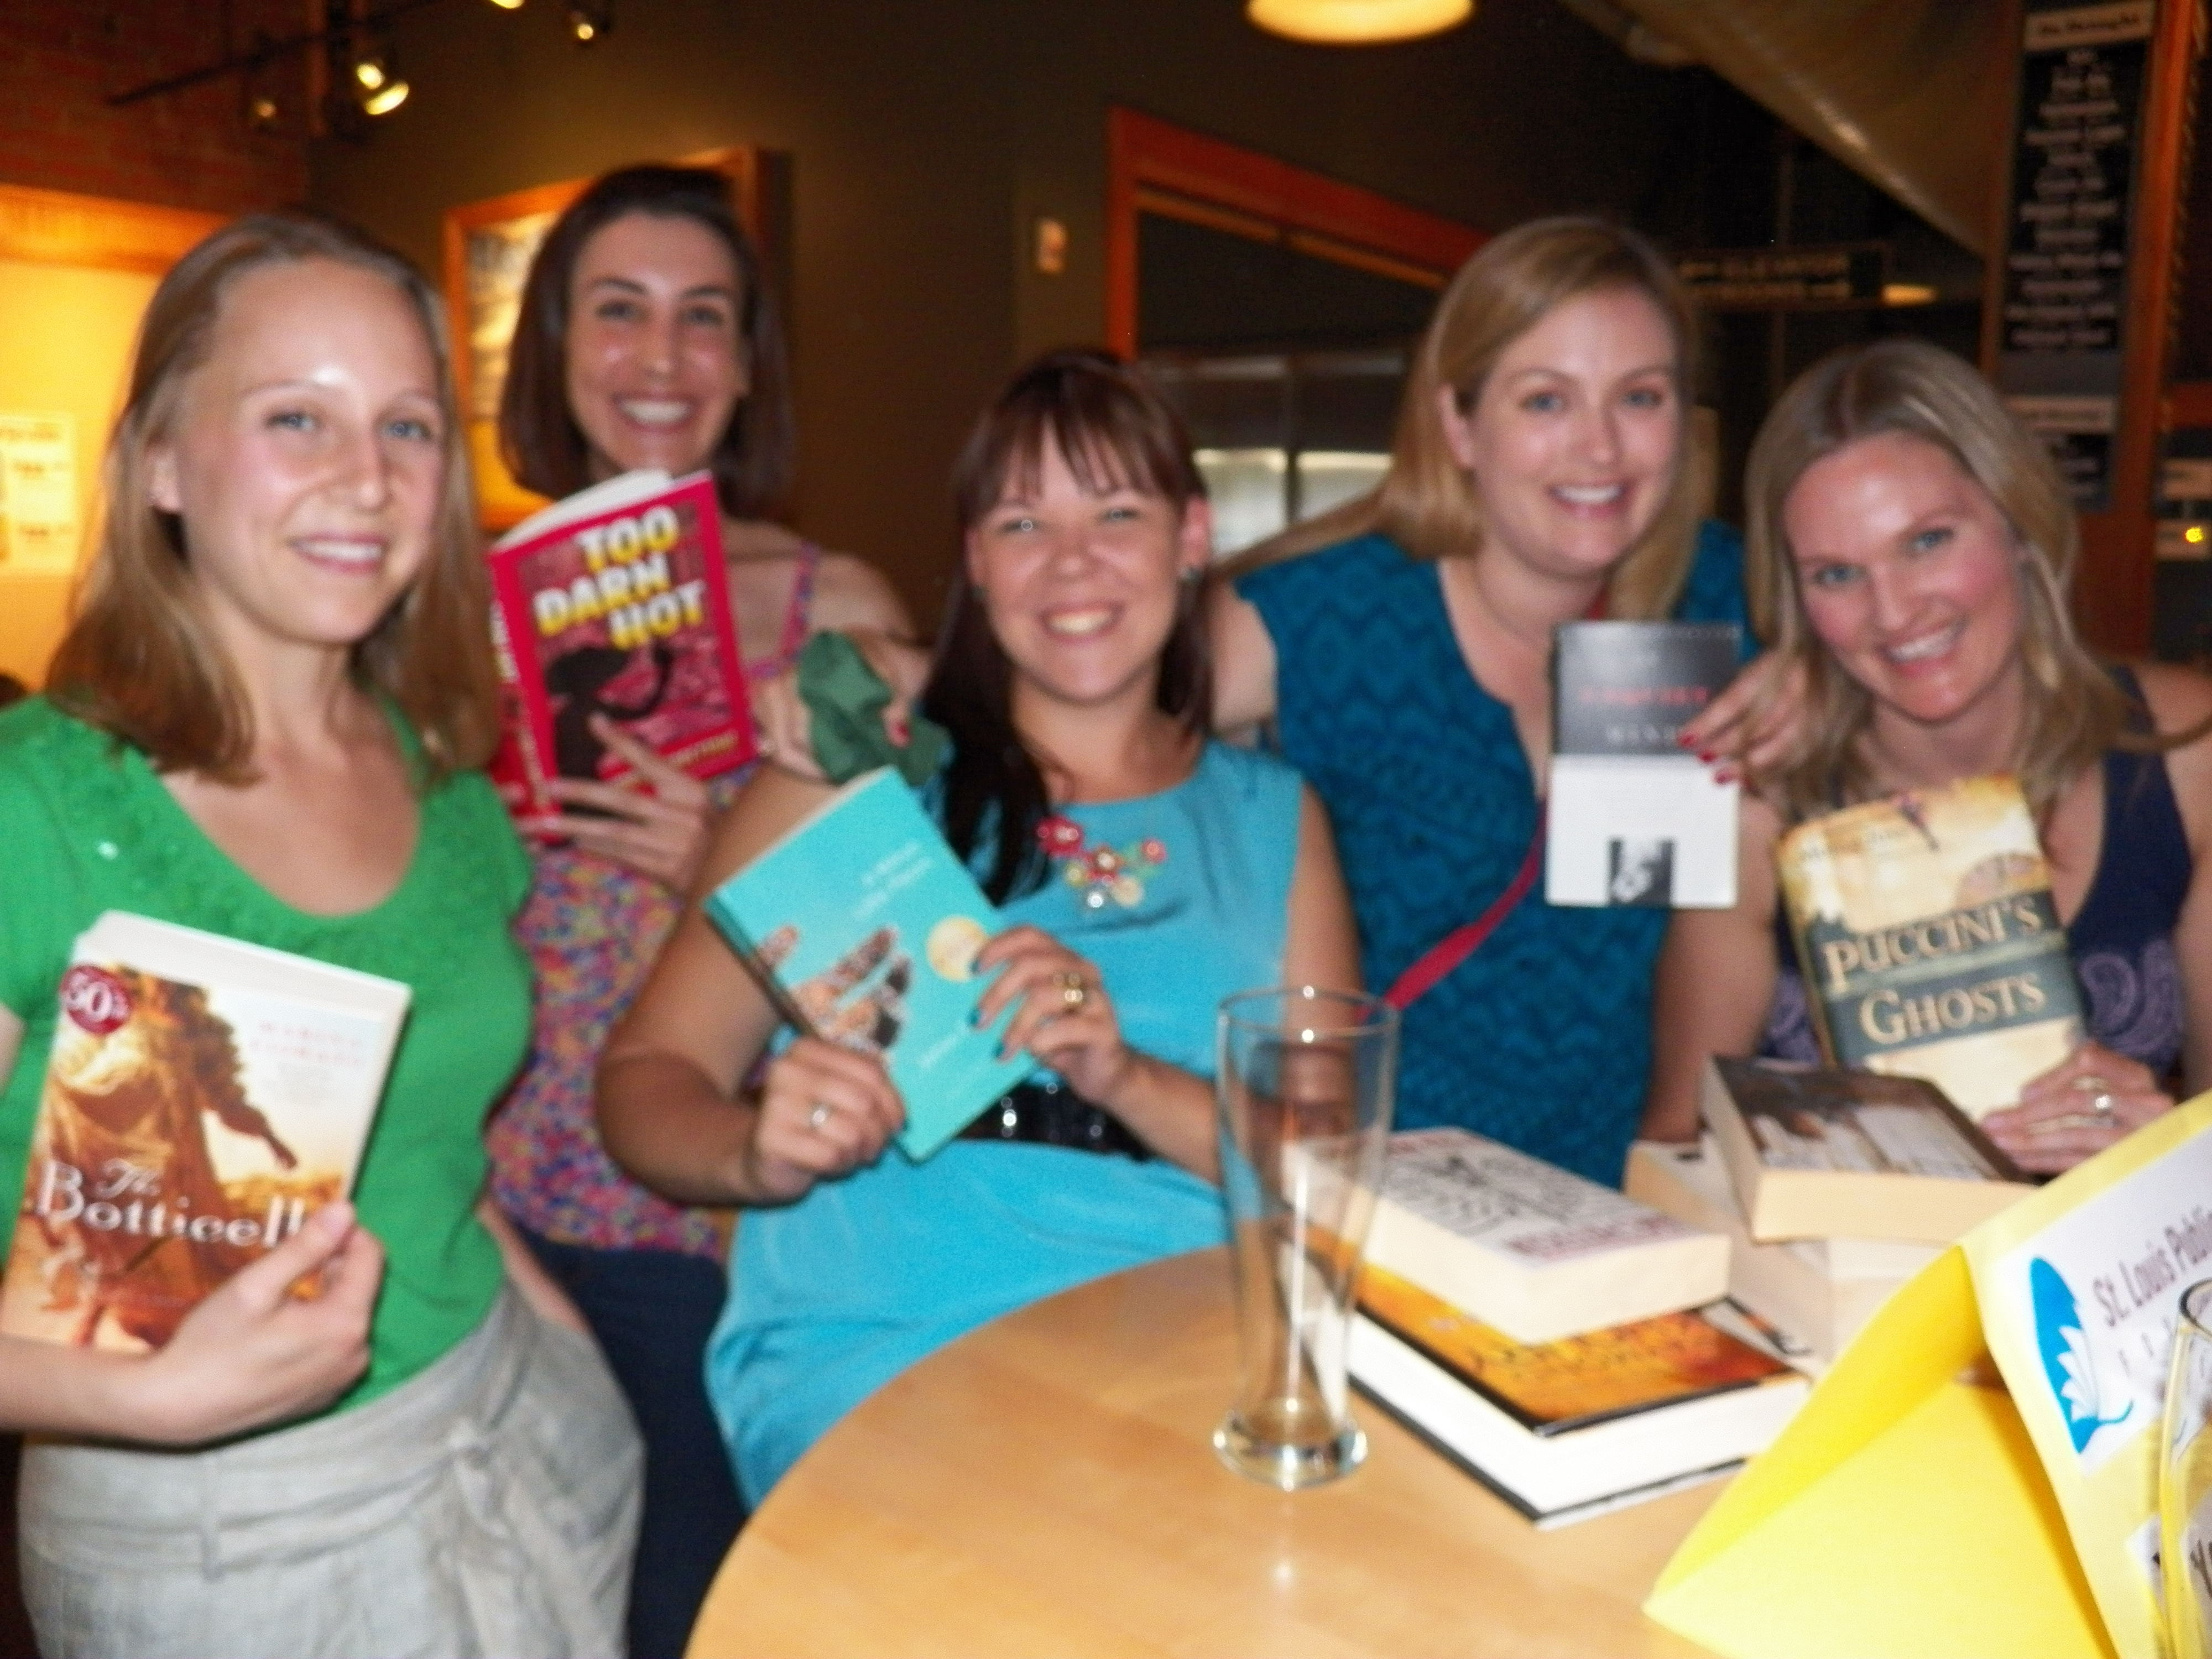 Young Literati @ Book Swap (Erica, Michelle, Jenny, and Emilie)